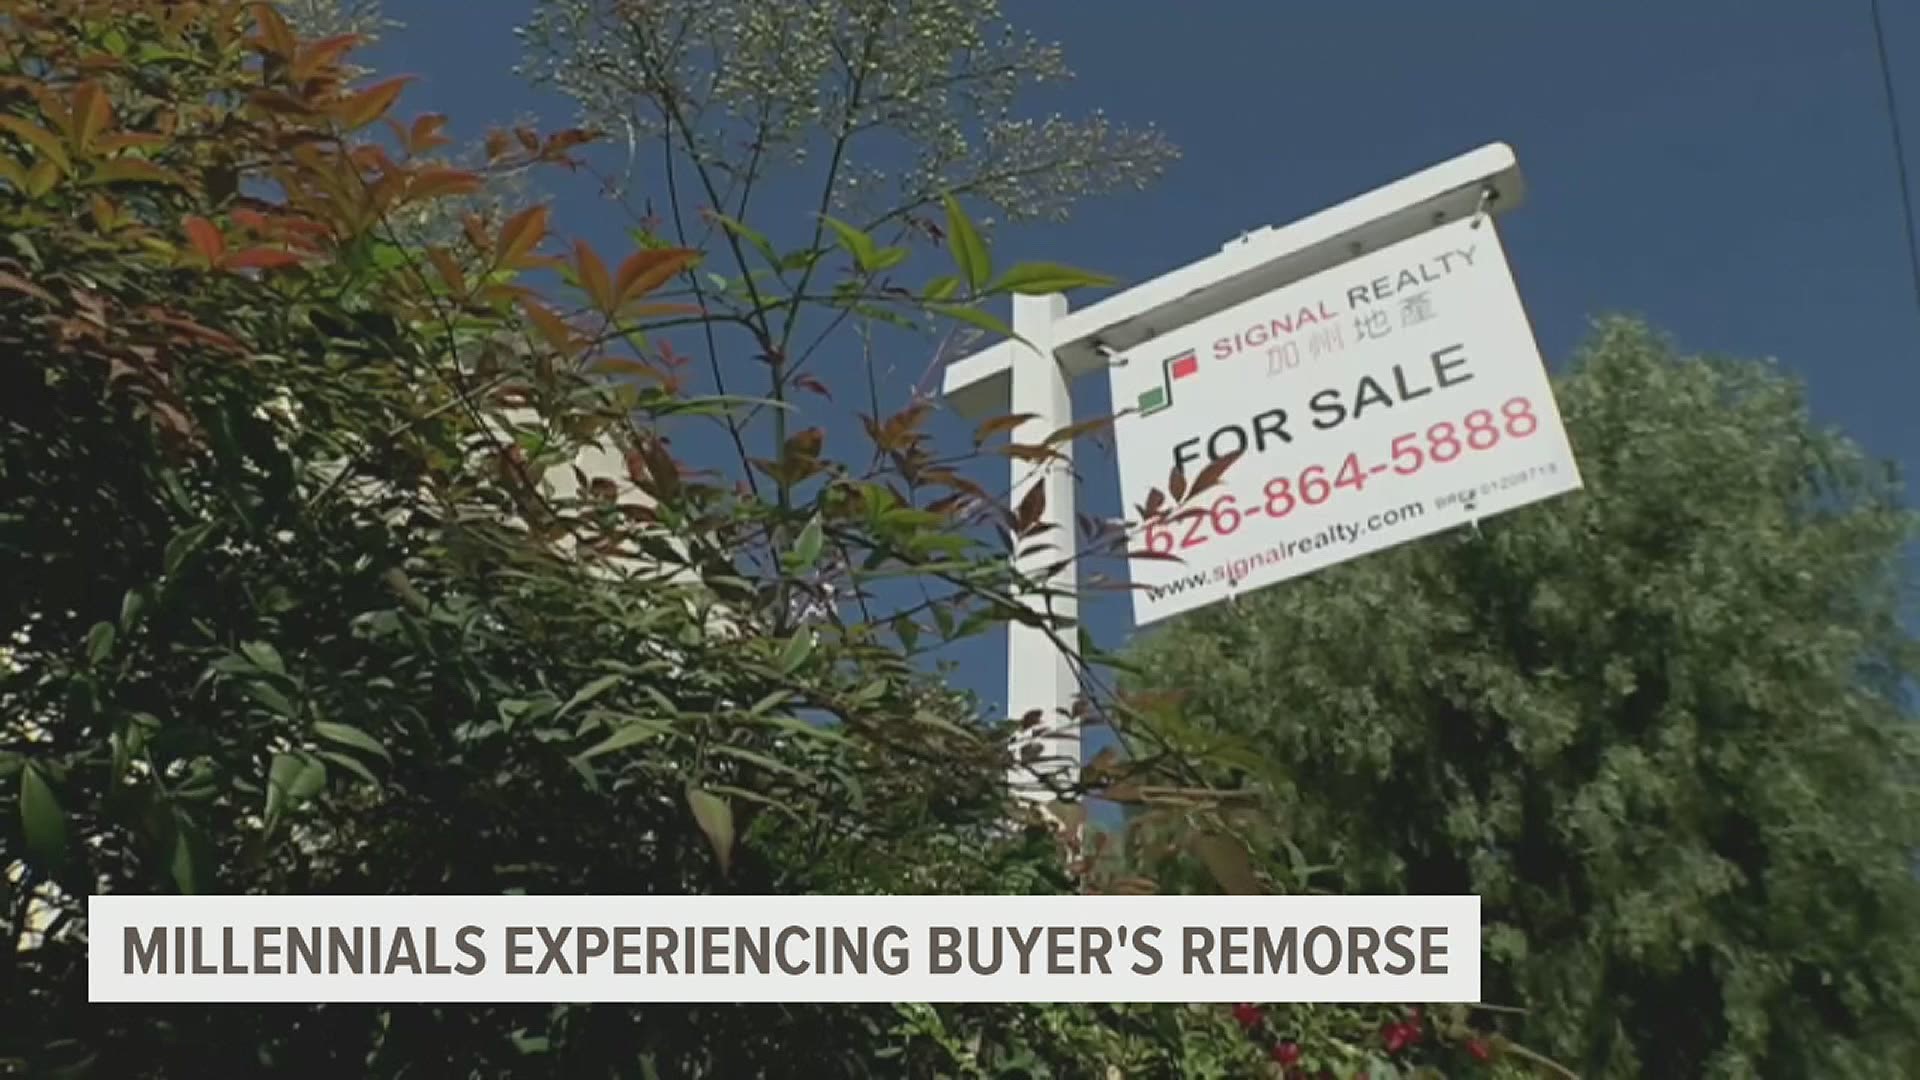 New survey shows many millennials regret buying their home for a variety of reasons.